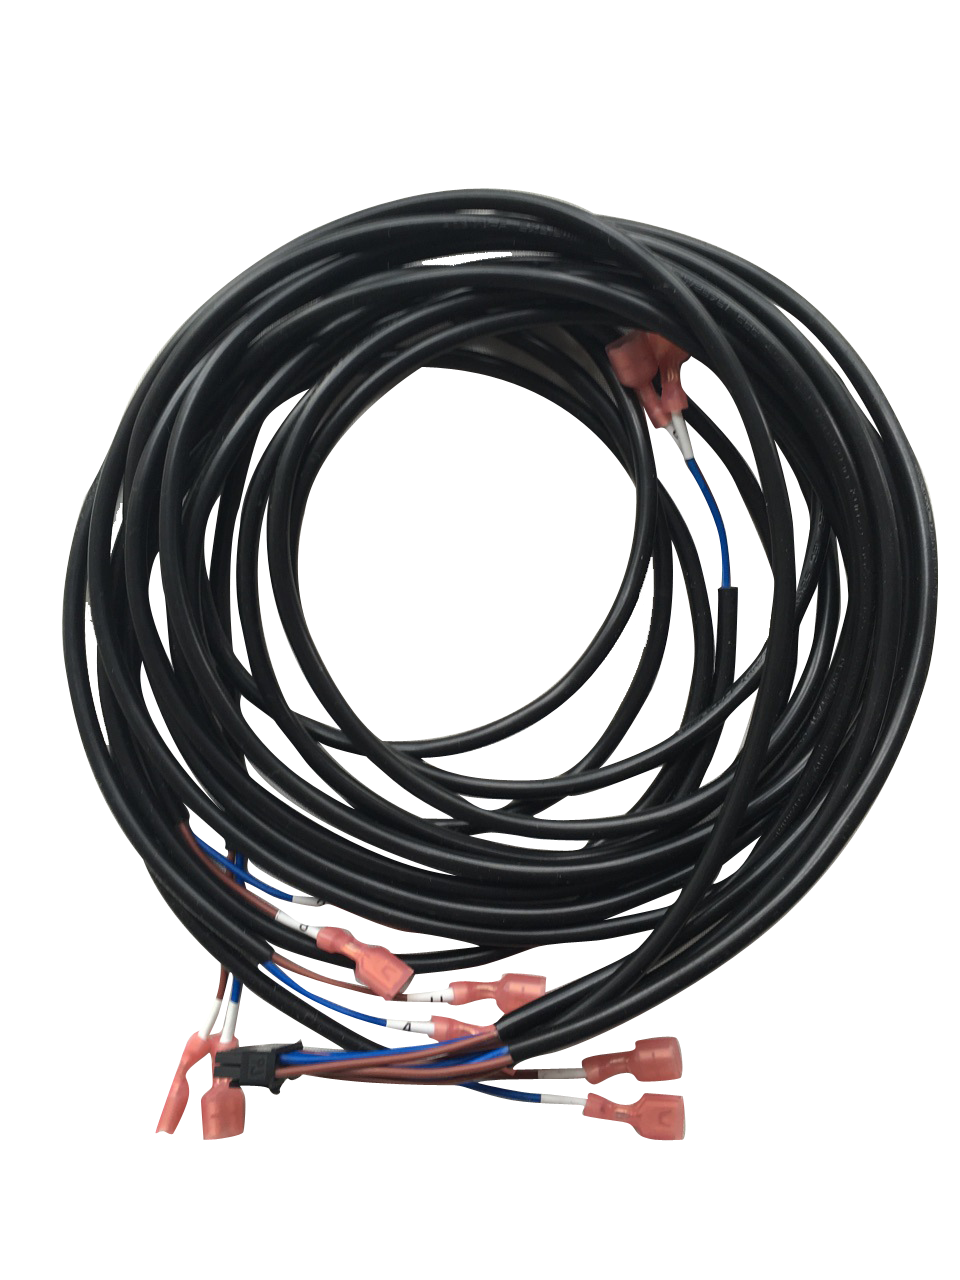 Electrical Cable Wire Harness for Fireplace